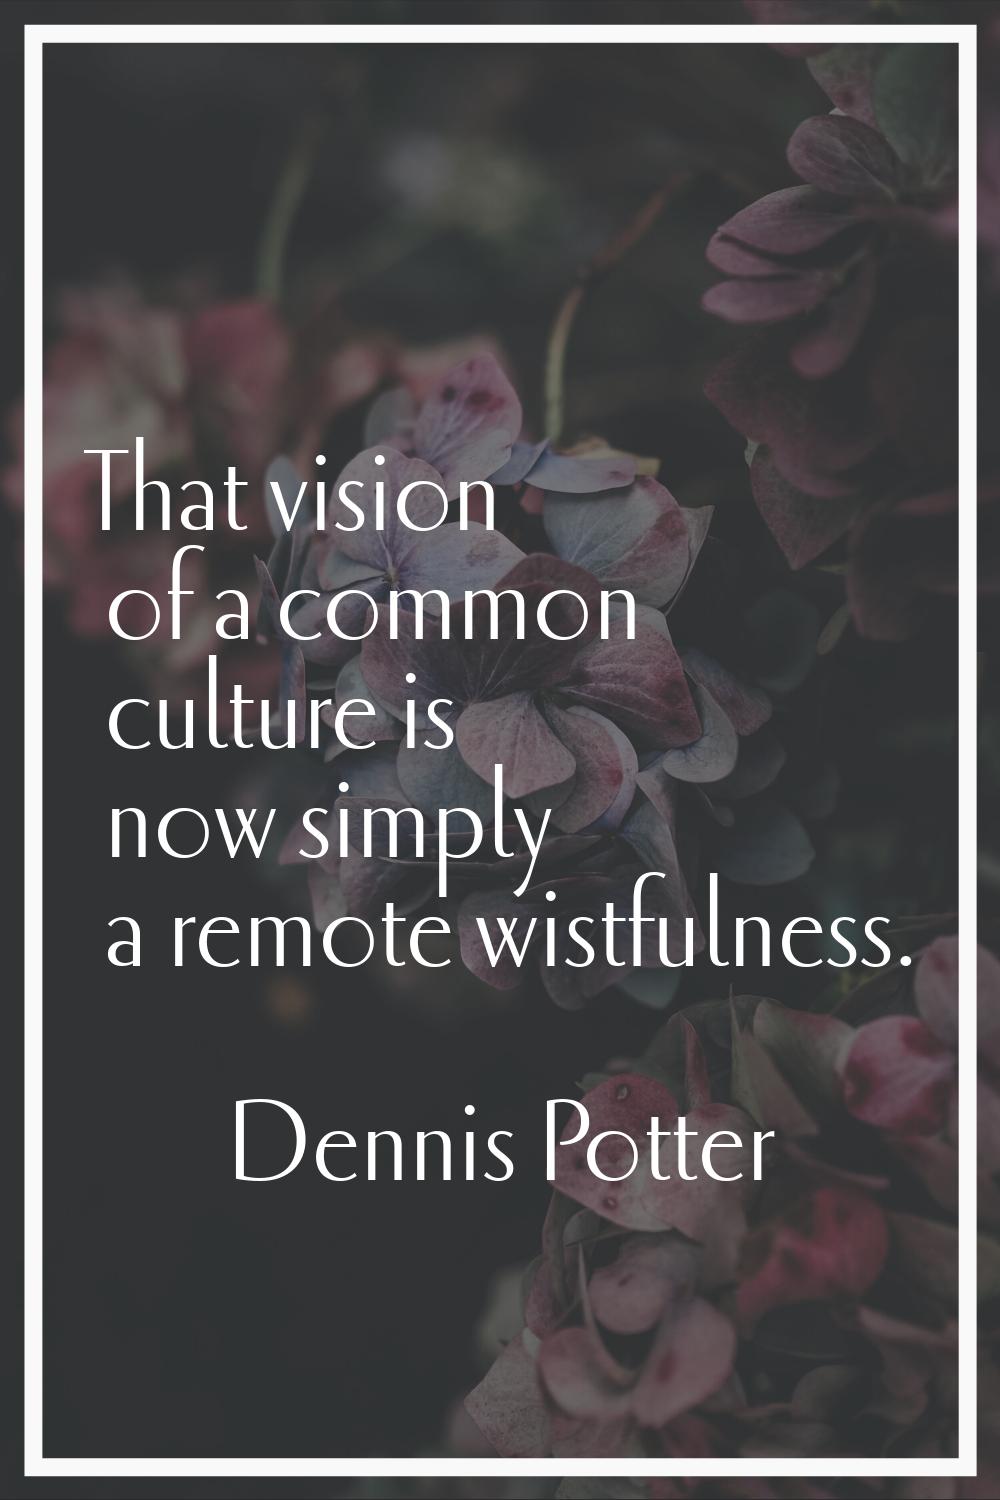 That vision of a common culture is now simply a remote wistfulness.